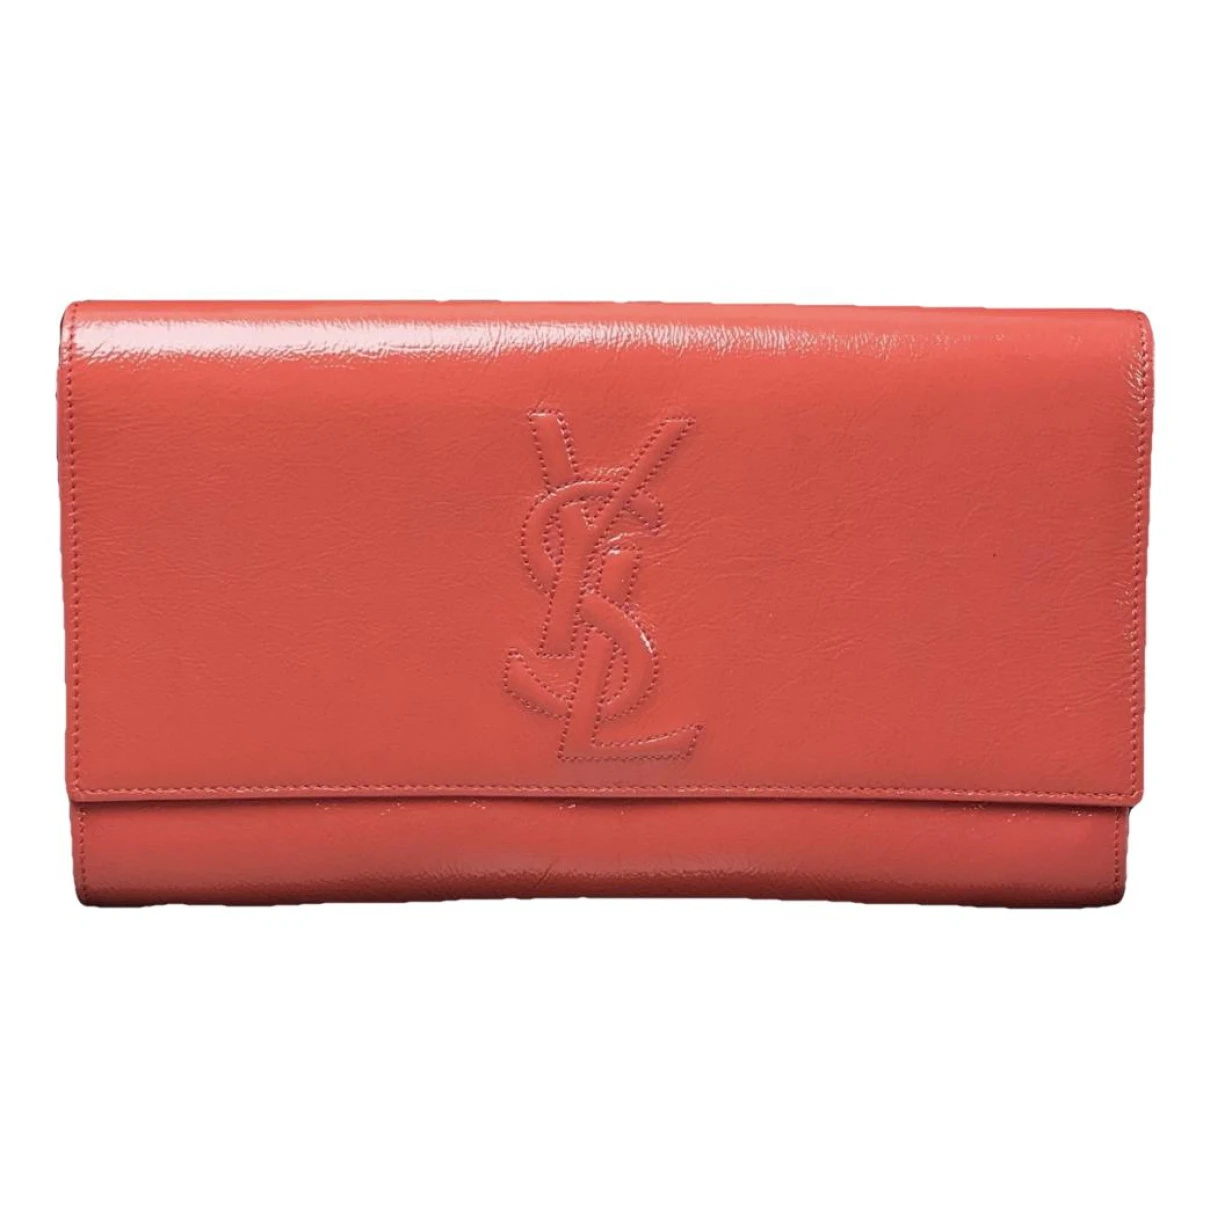 Pre-owned Saint Laurent Chyc Patent Leather Clutch Bag In Red